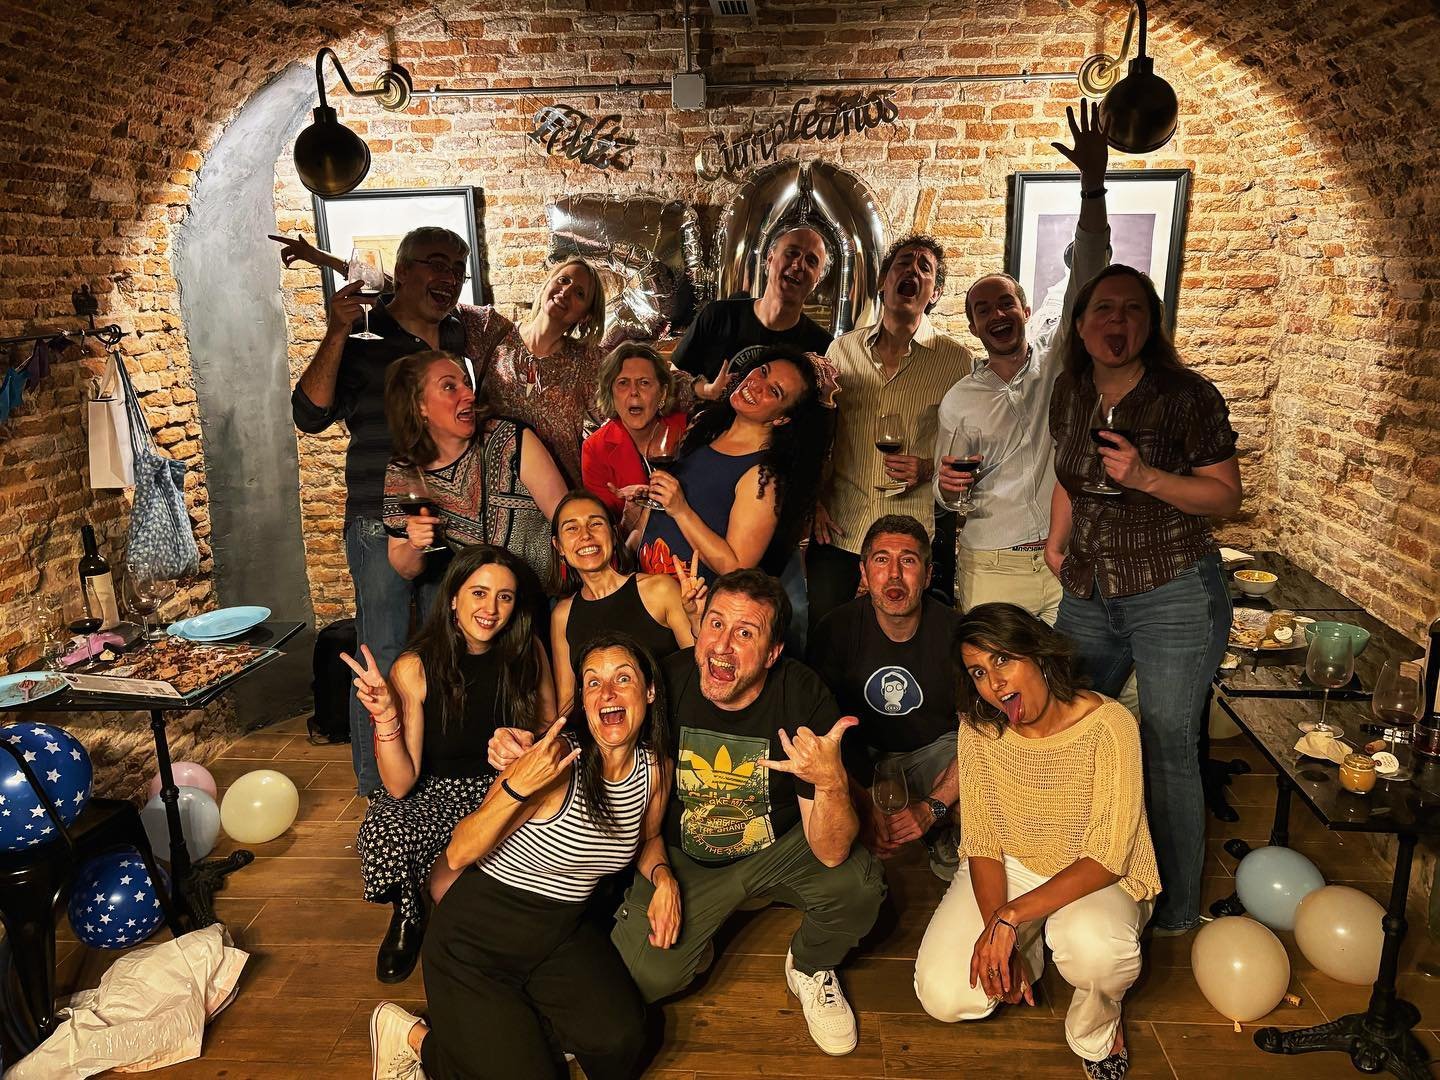 Want to celebrate a birthday or a private event? Well&hellip;there&rsquo;s a reason we have our underground wine cave! Get in touch and we can make your dreams a reality! // &iquest;Quieres celebrar un cumplea&ntilde;os o un evento privado? Bueno... 